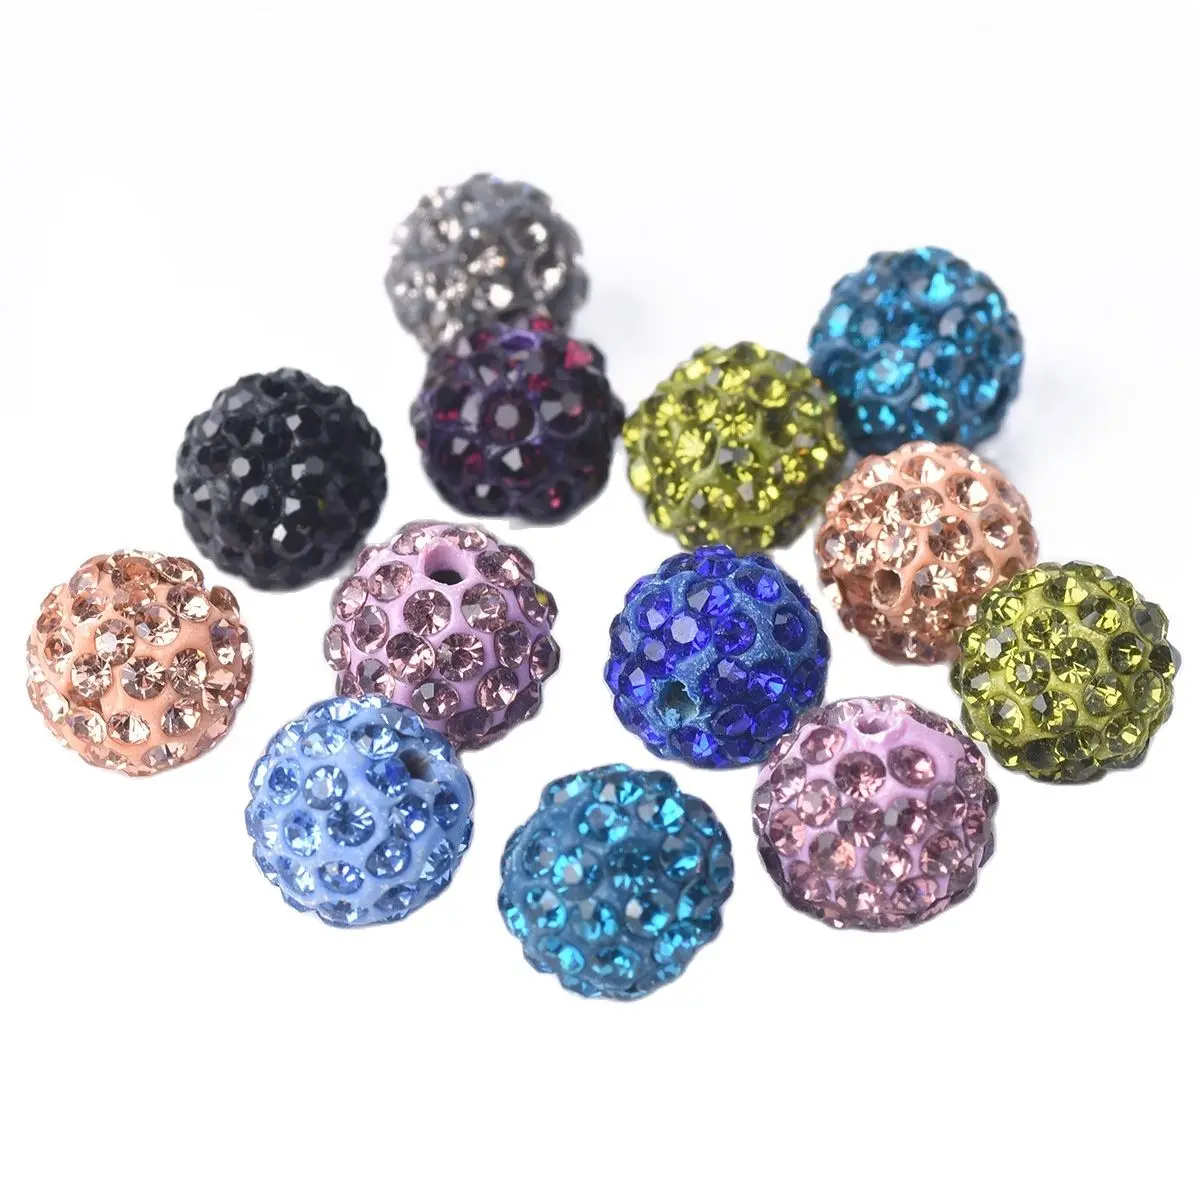 10pcs 10mm Random Mixed Colors Round Crystal Glass Ball & Cray Loose Beads for Jewelry Making DIY Crafts Findings блокнот склейка clairefontaine cray on а5 50 л 120 г мелкозернистый